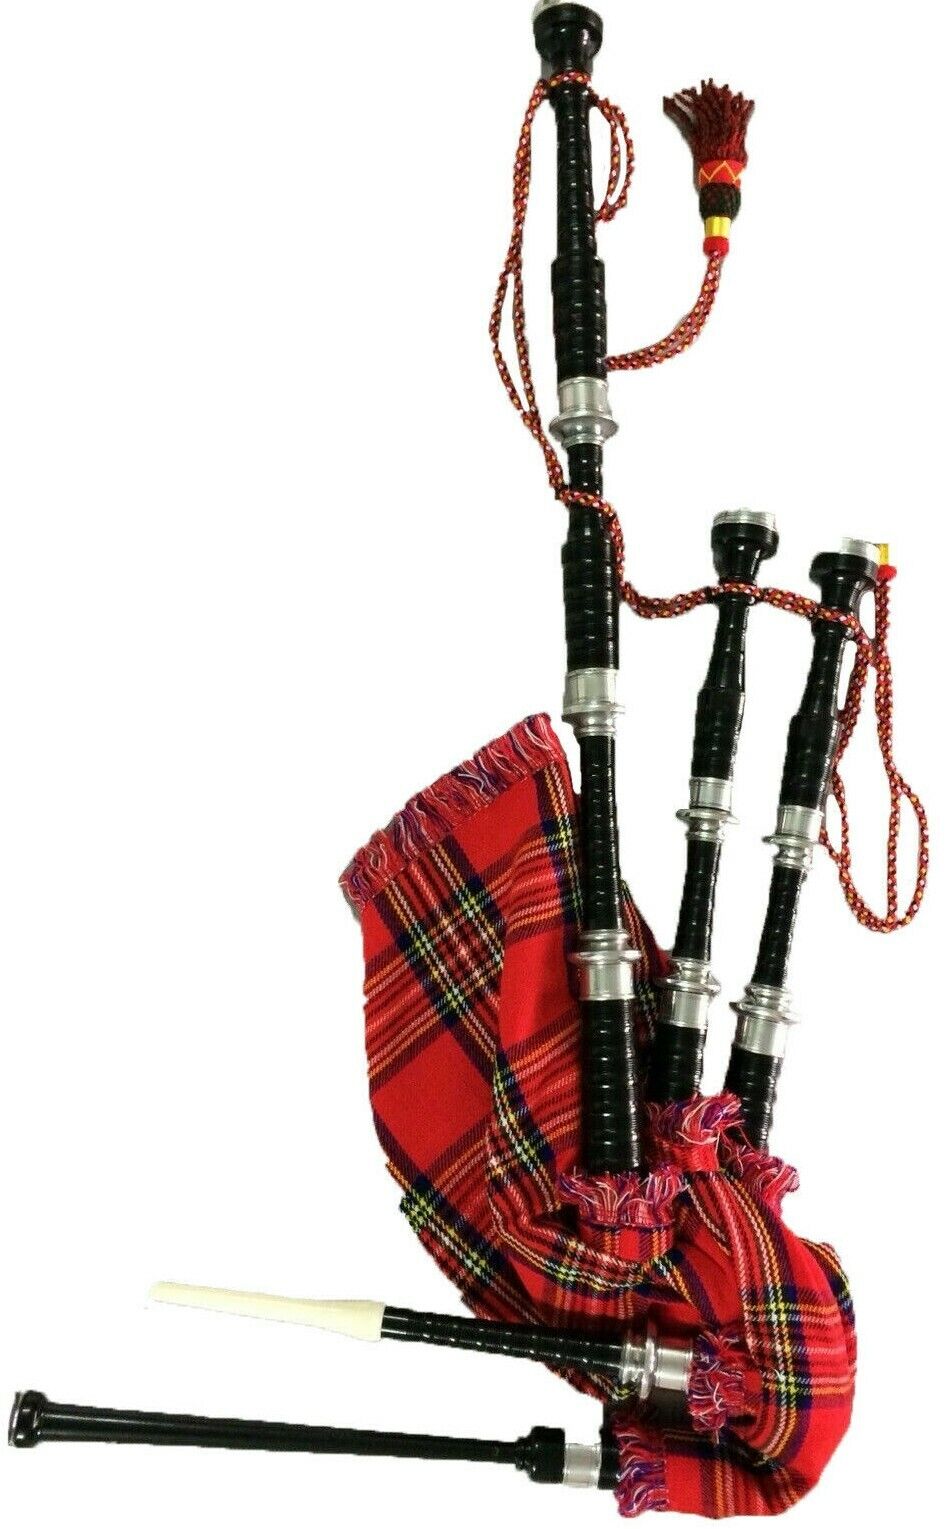 RI GREAT HIGHLAND BAGPIPE MADE TEFLON PLASTIC OF MATERIAL Large special Popular popular price